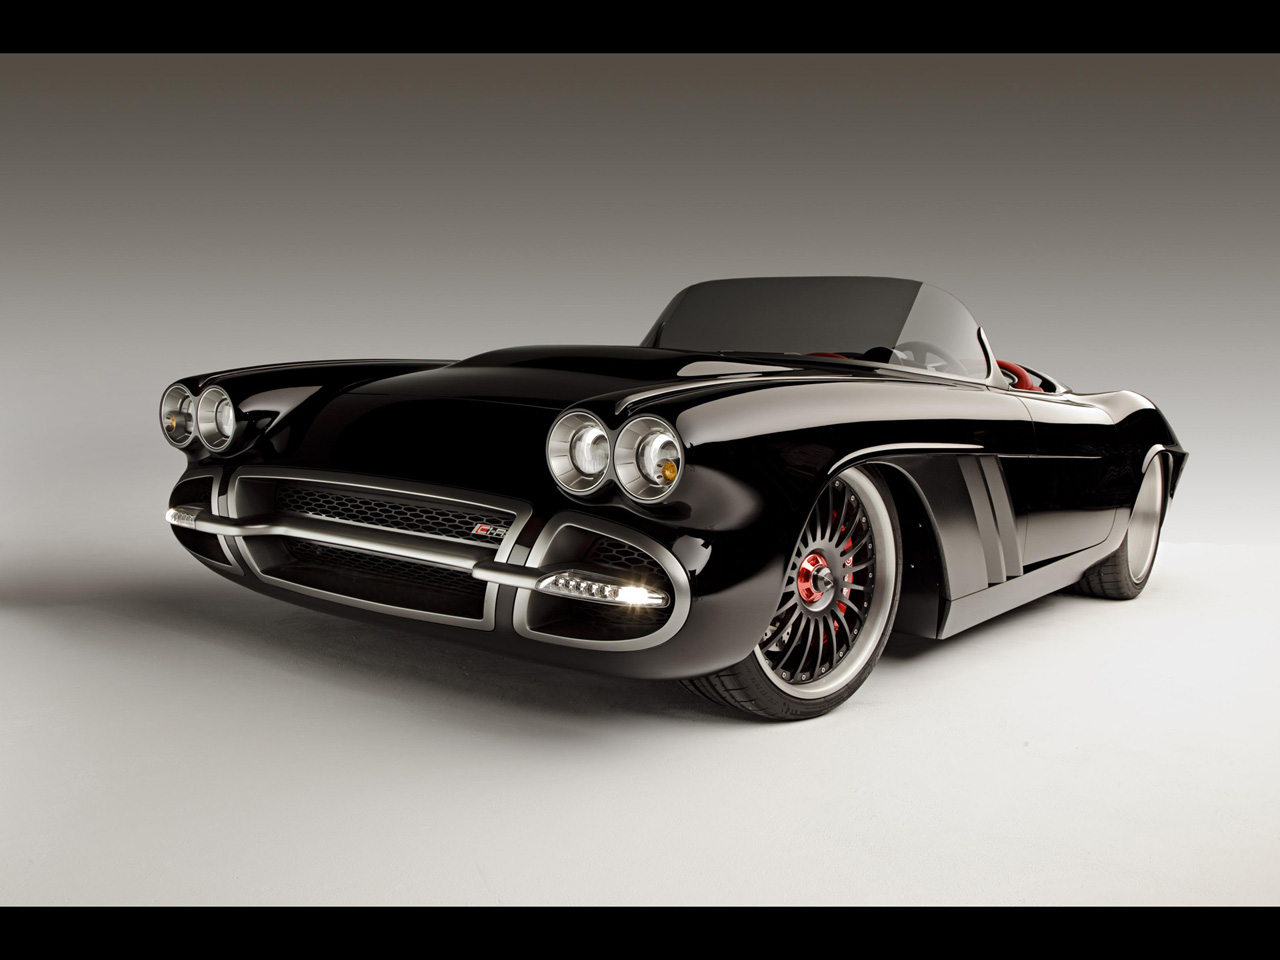 1962-Chevrolet-Corvette-C1-RS-by-Roadster-Shop-Front-Angle-1280x960.jpg